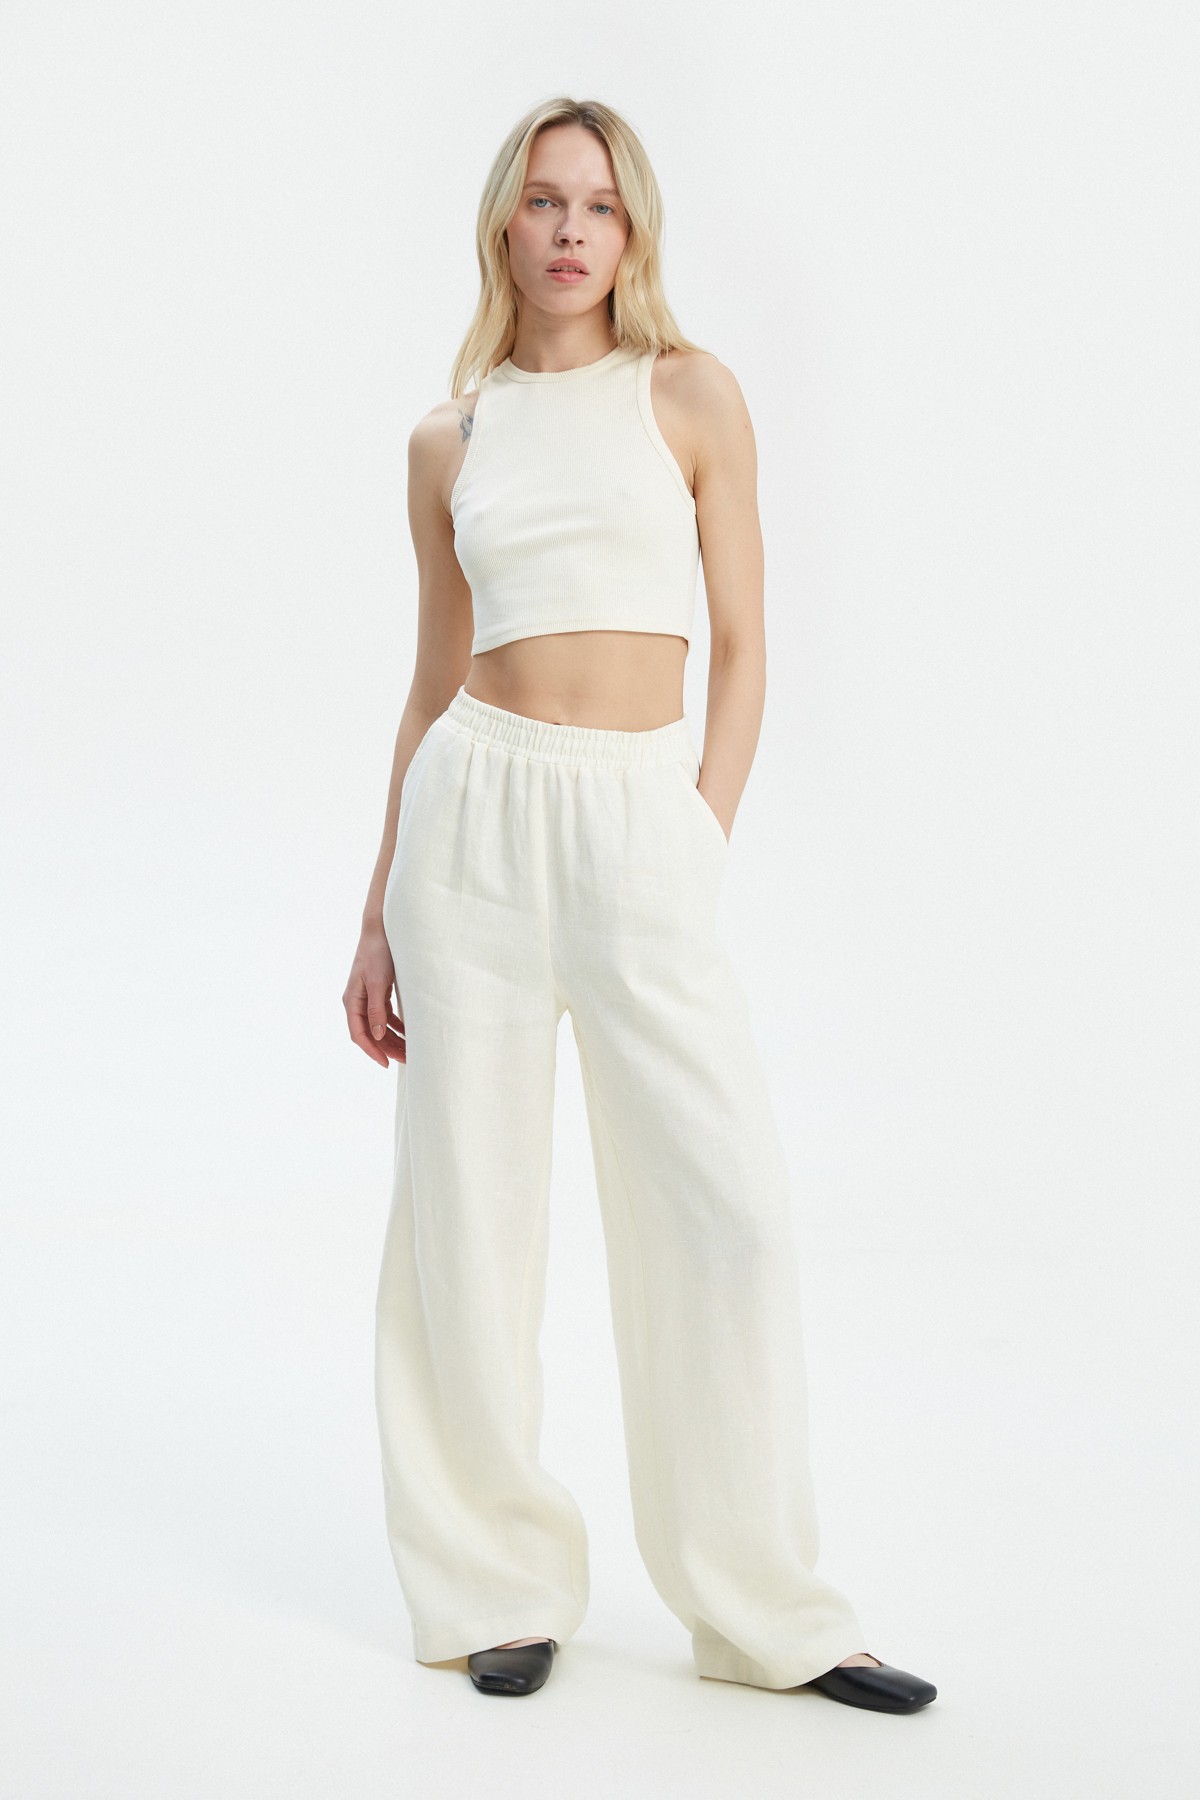 Milky loose-fit pants made of 100% linen